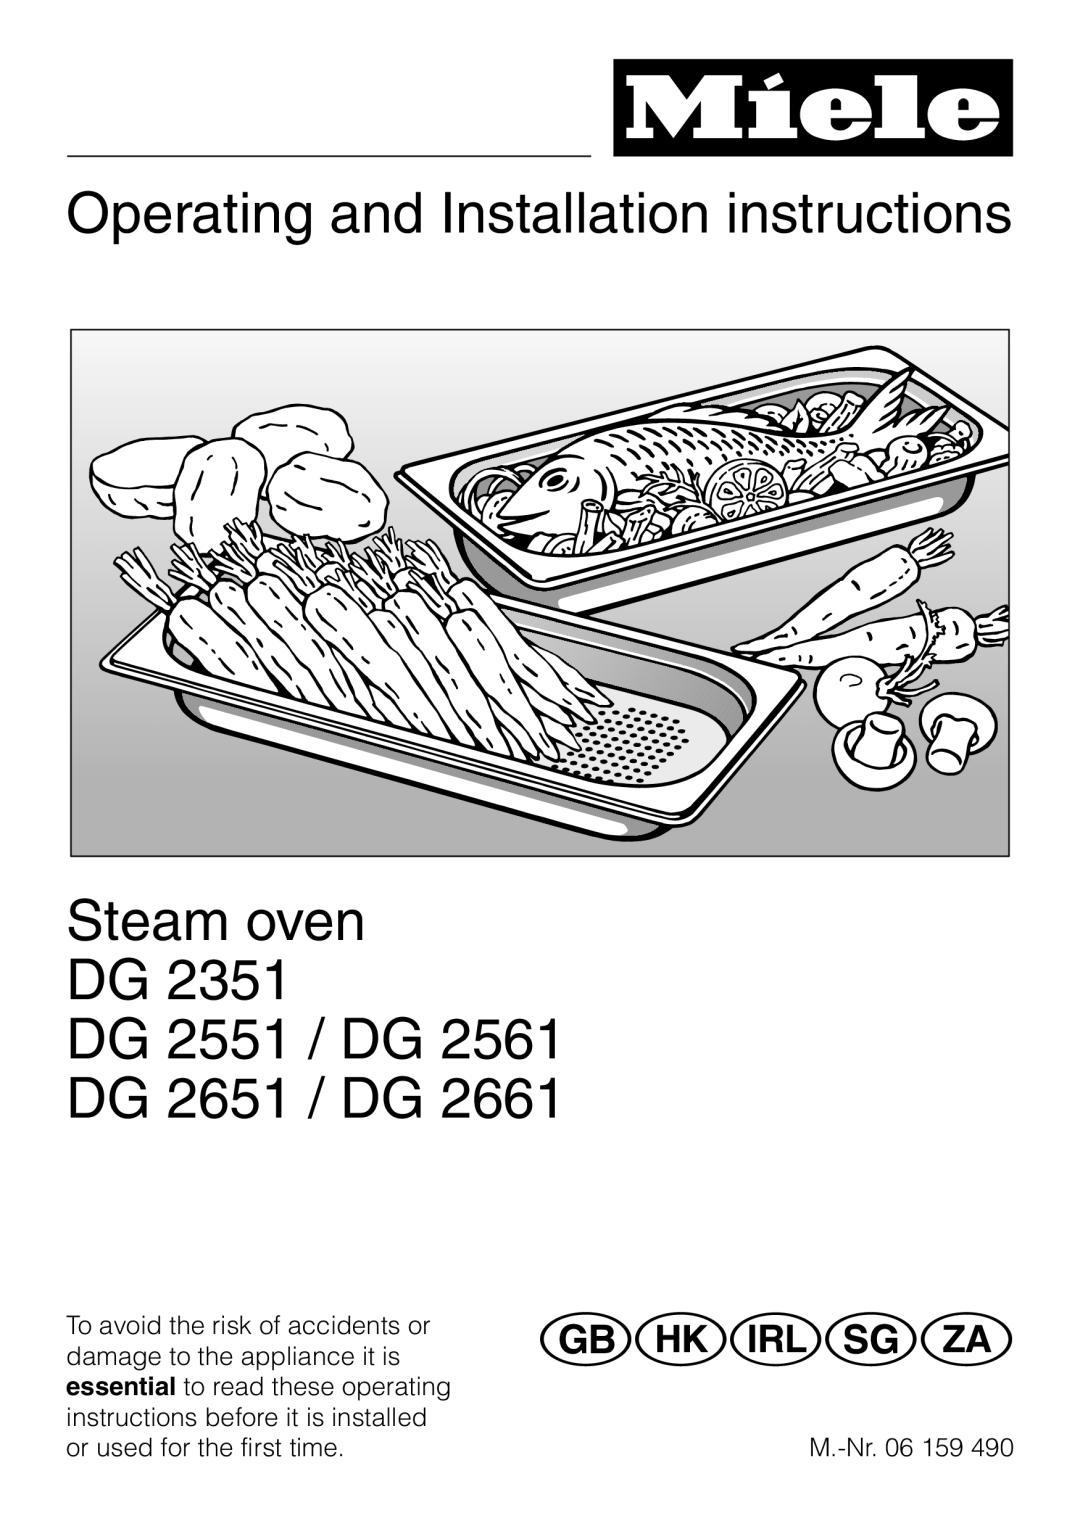 Miele installation instructions Operating and Installation instructions Steam oven DG DG 2551 / DG, DG 2651 / DG, GHirZ 